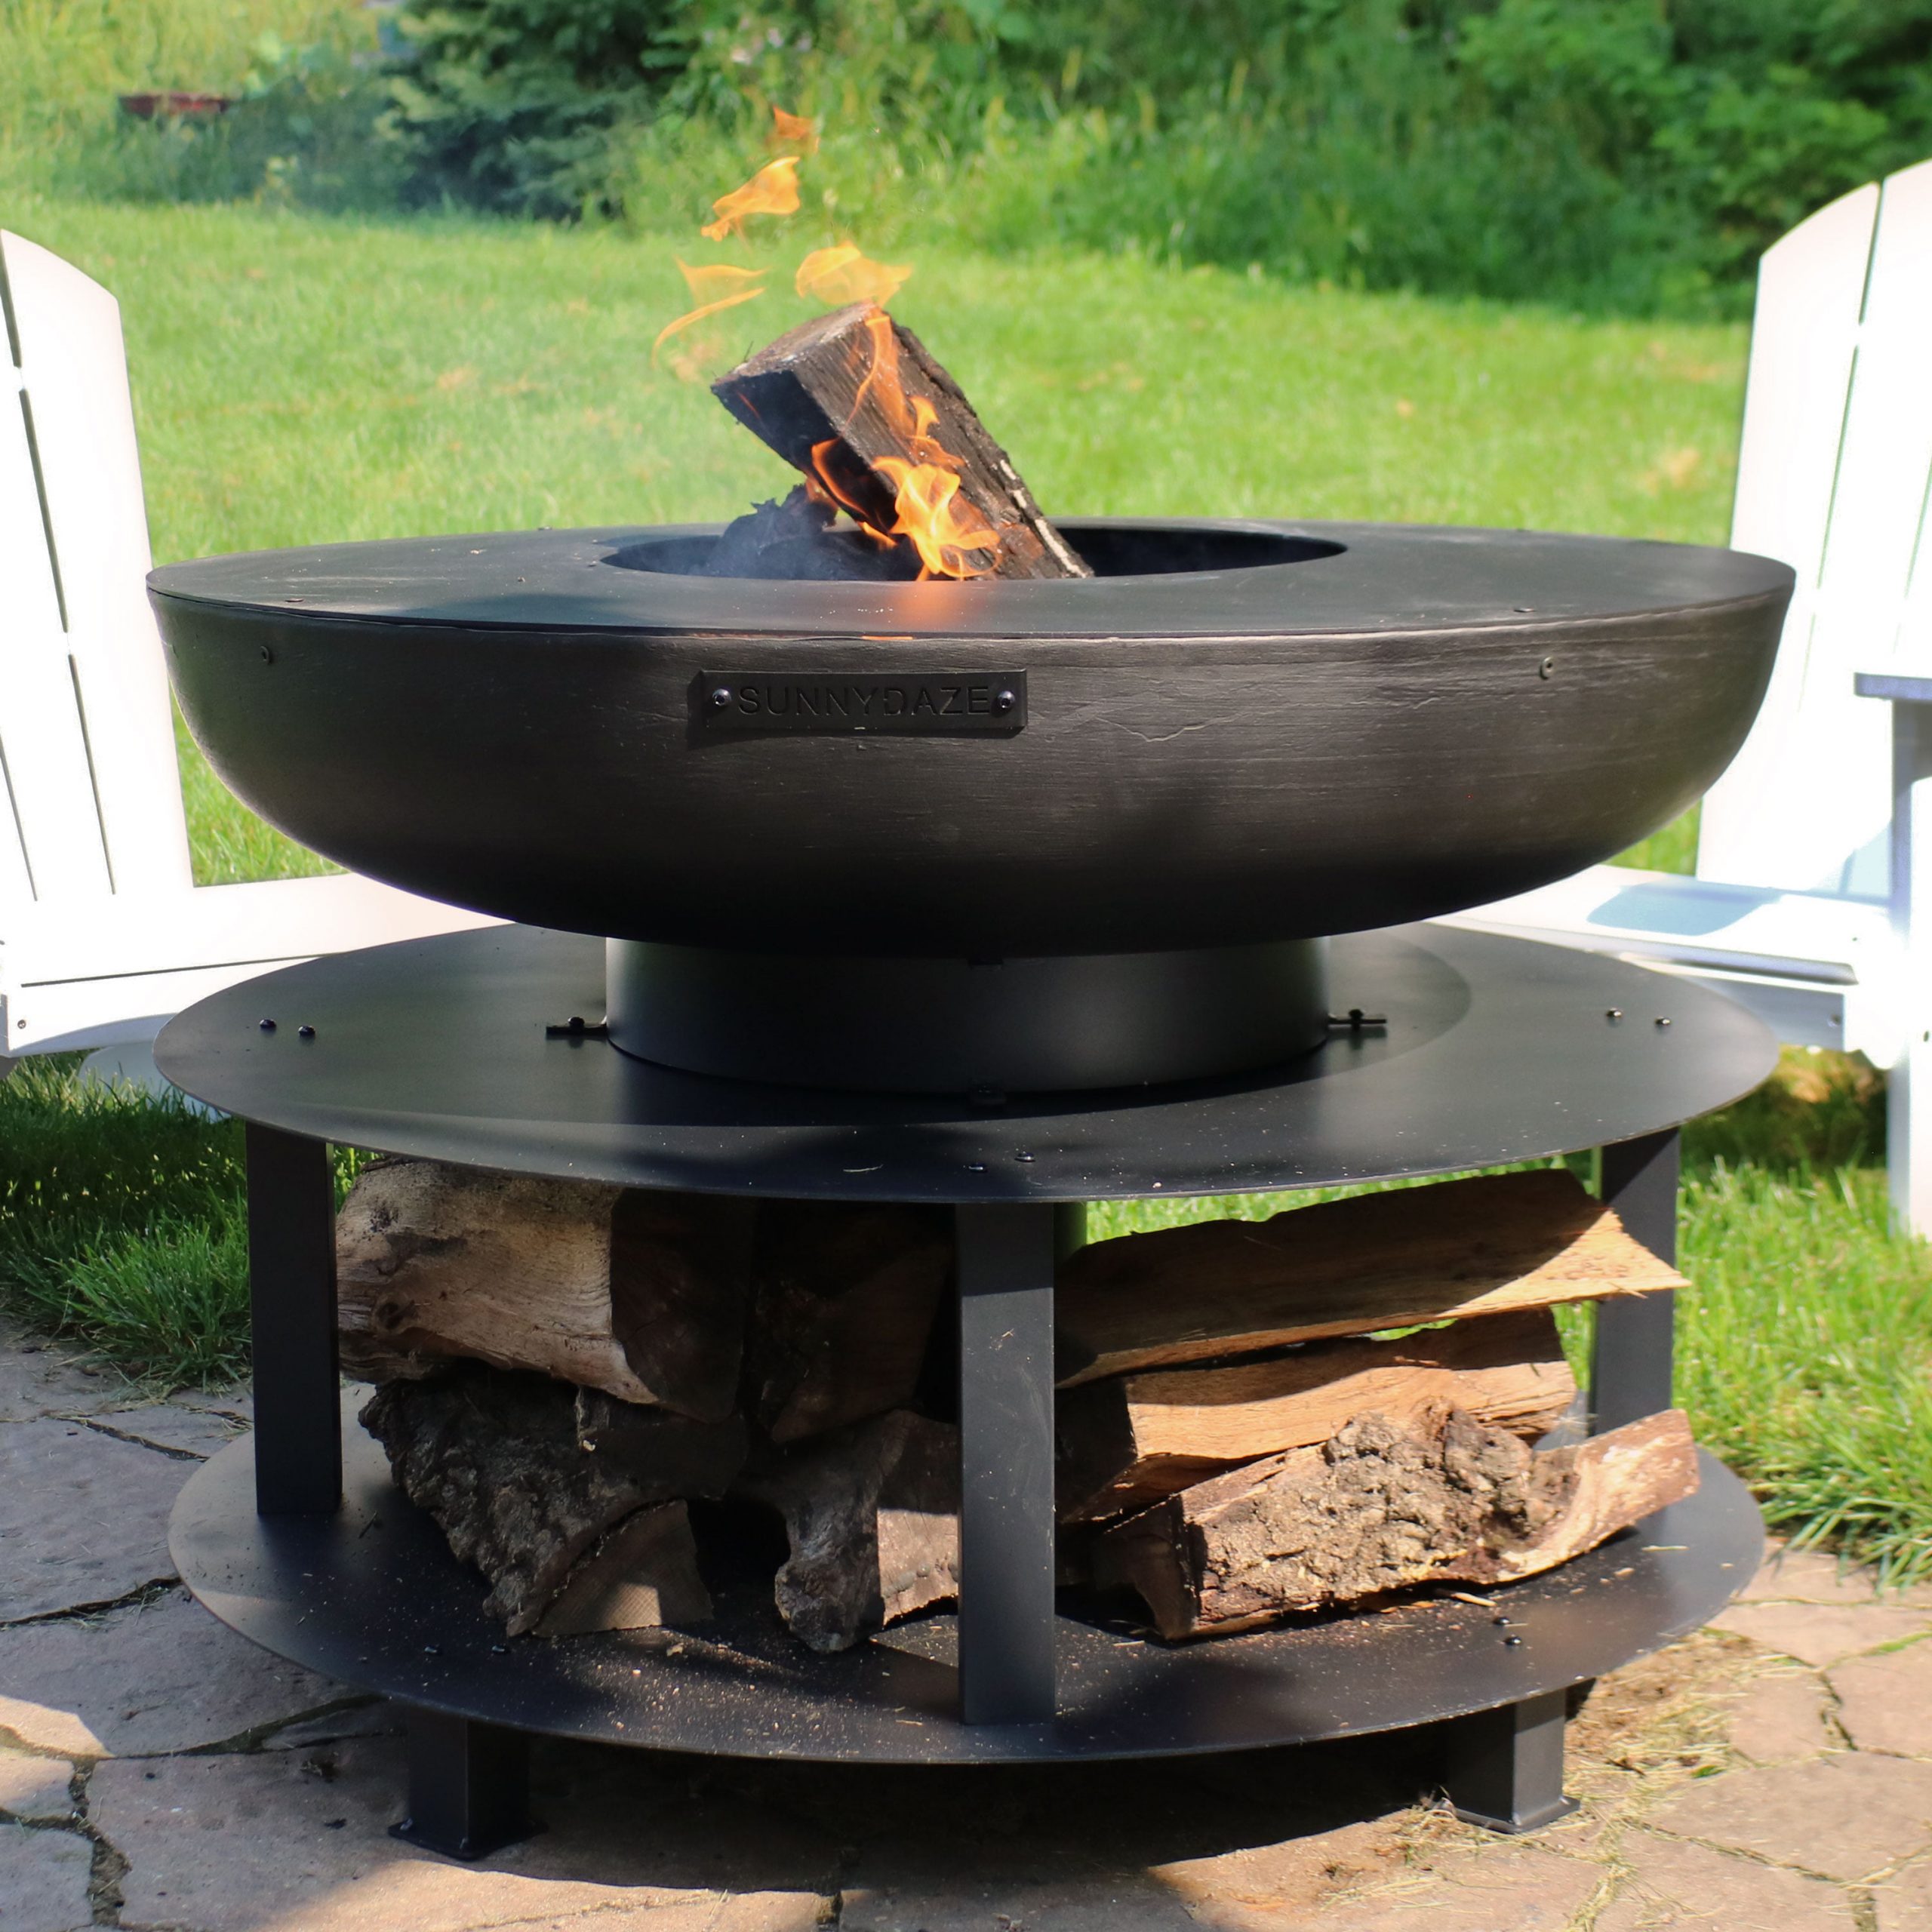 Sunnydaze Large Outdoor Fire Pit with Cooking Ledge and Built